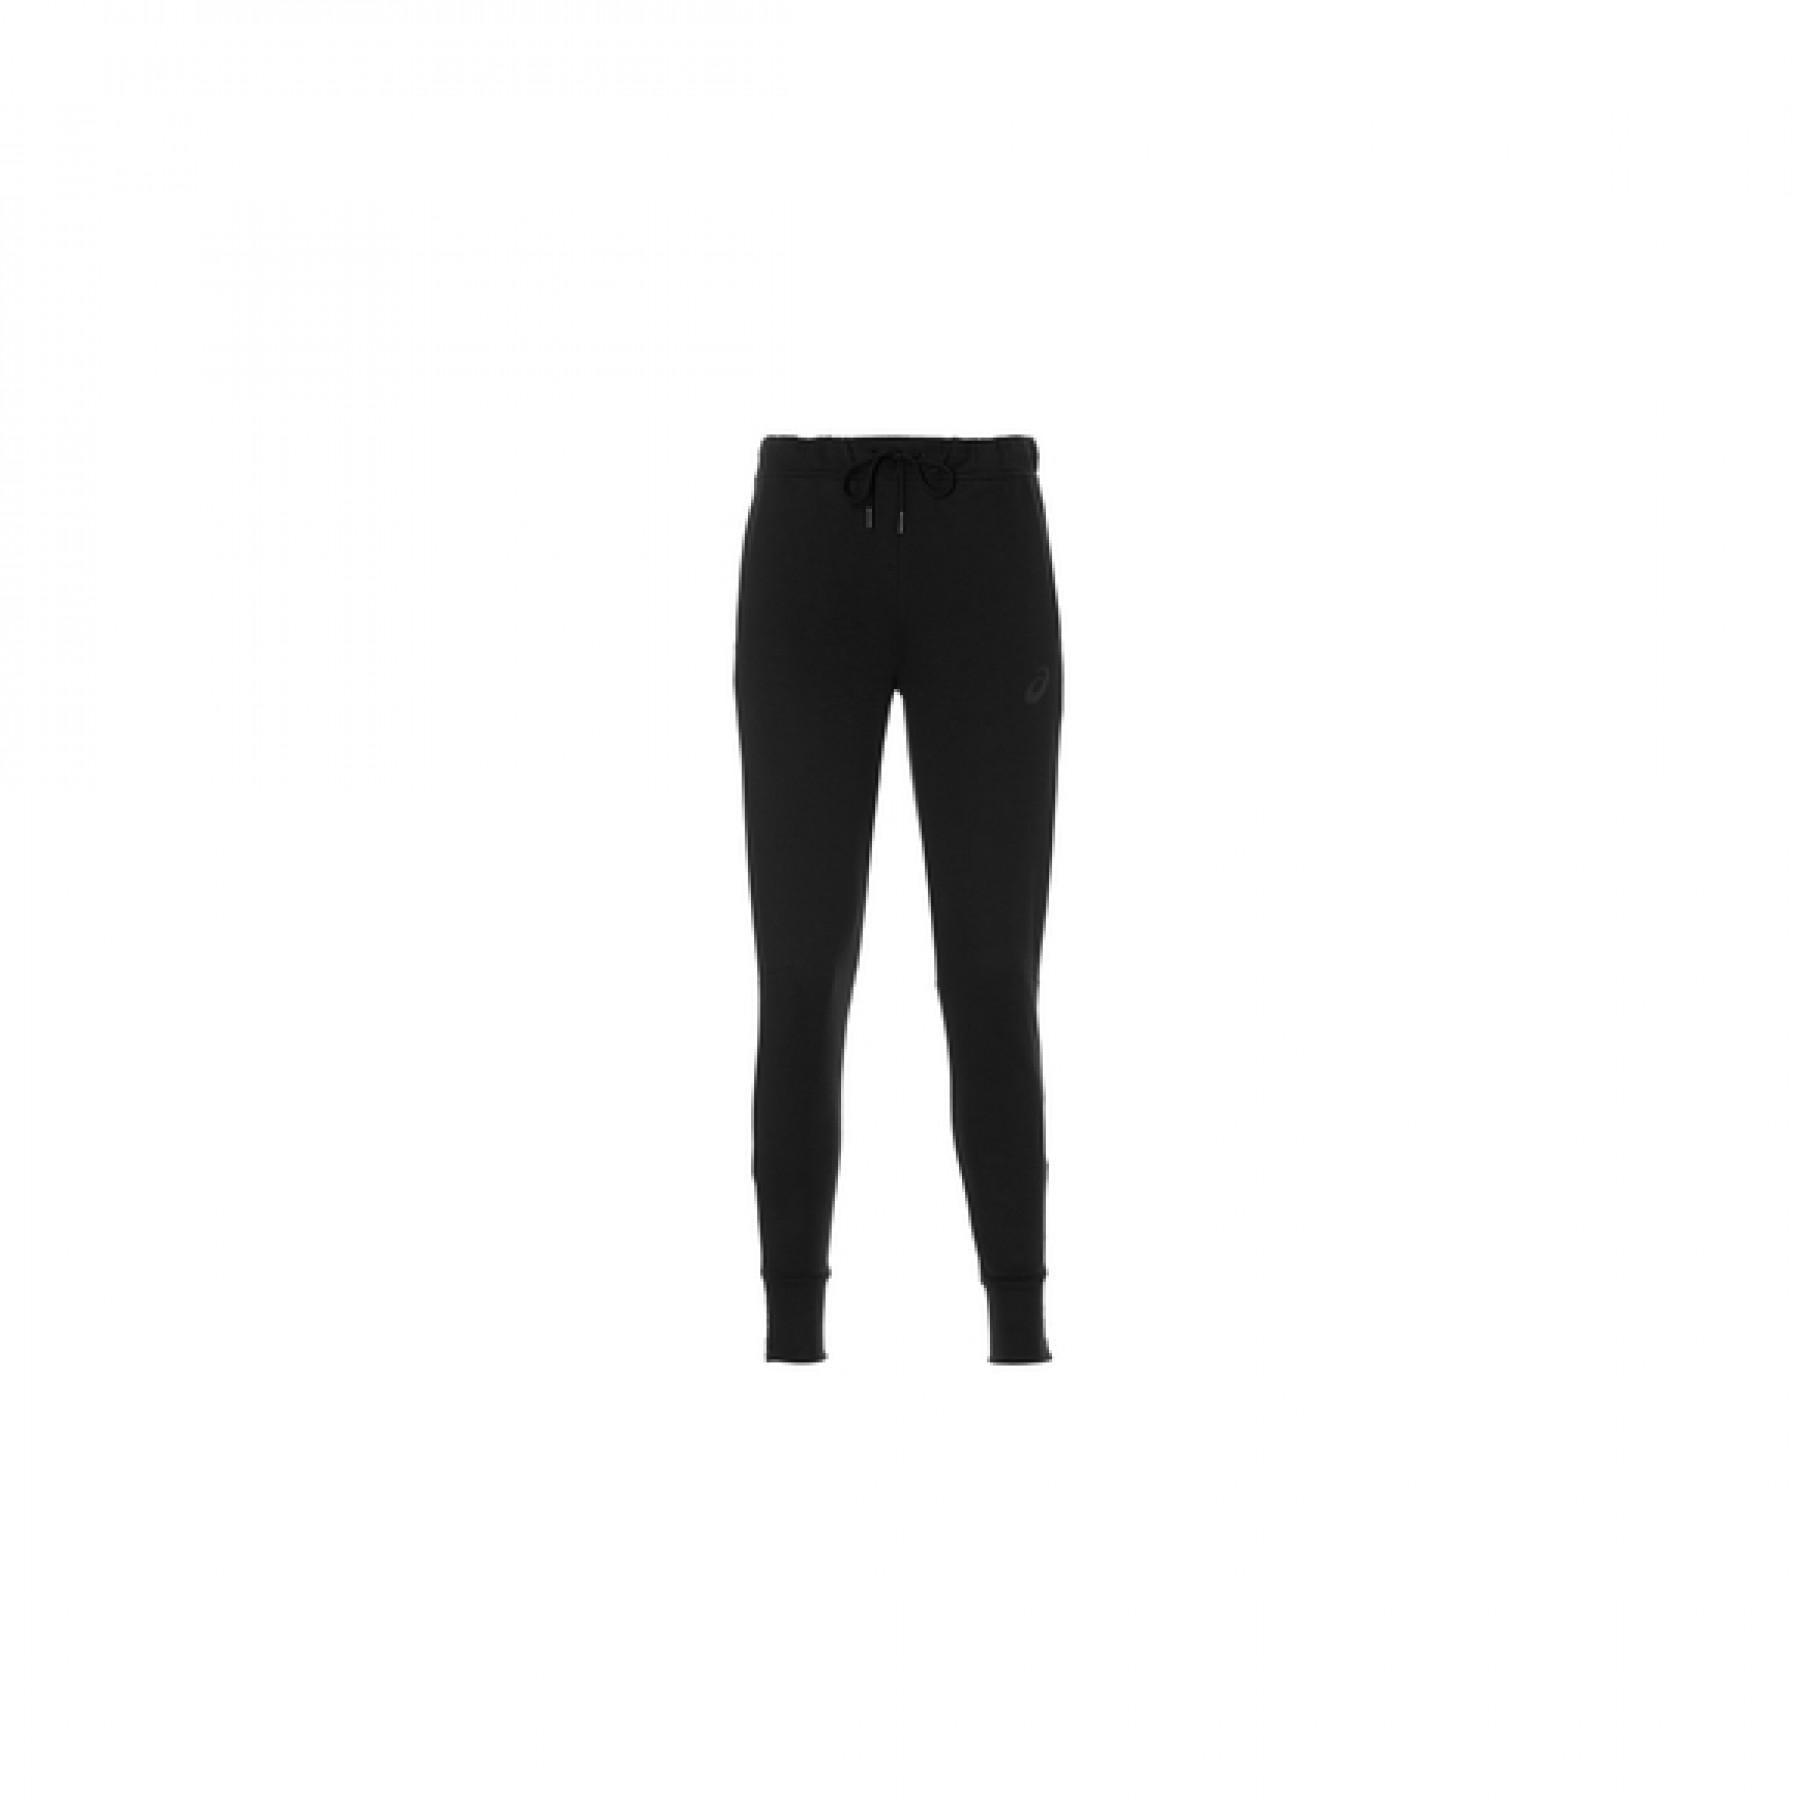 Women's trousers Asics tailored pant